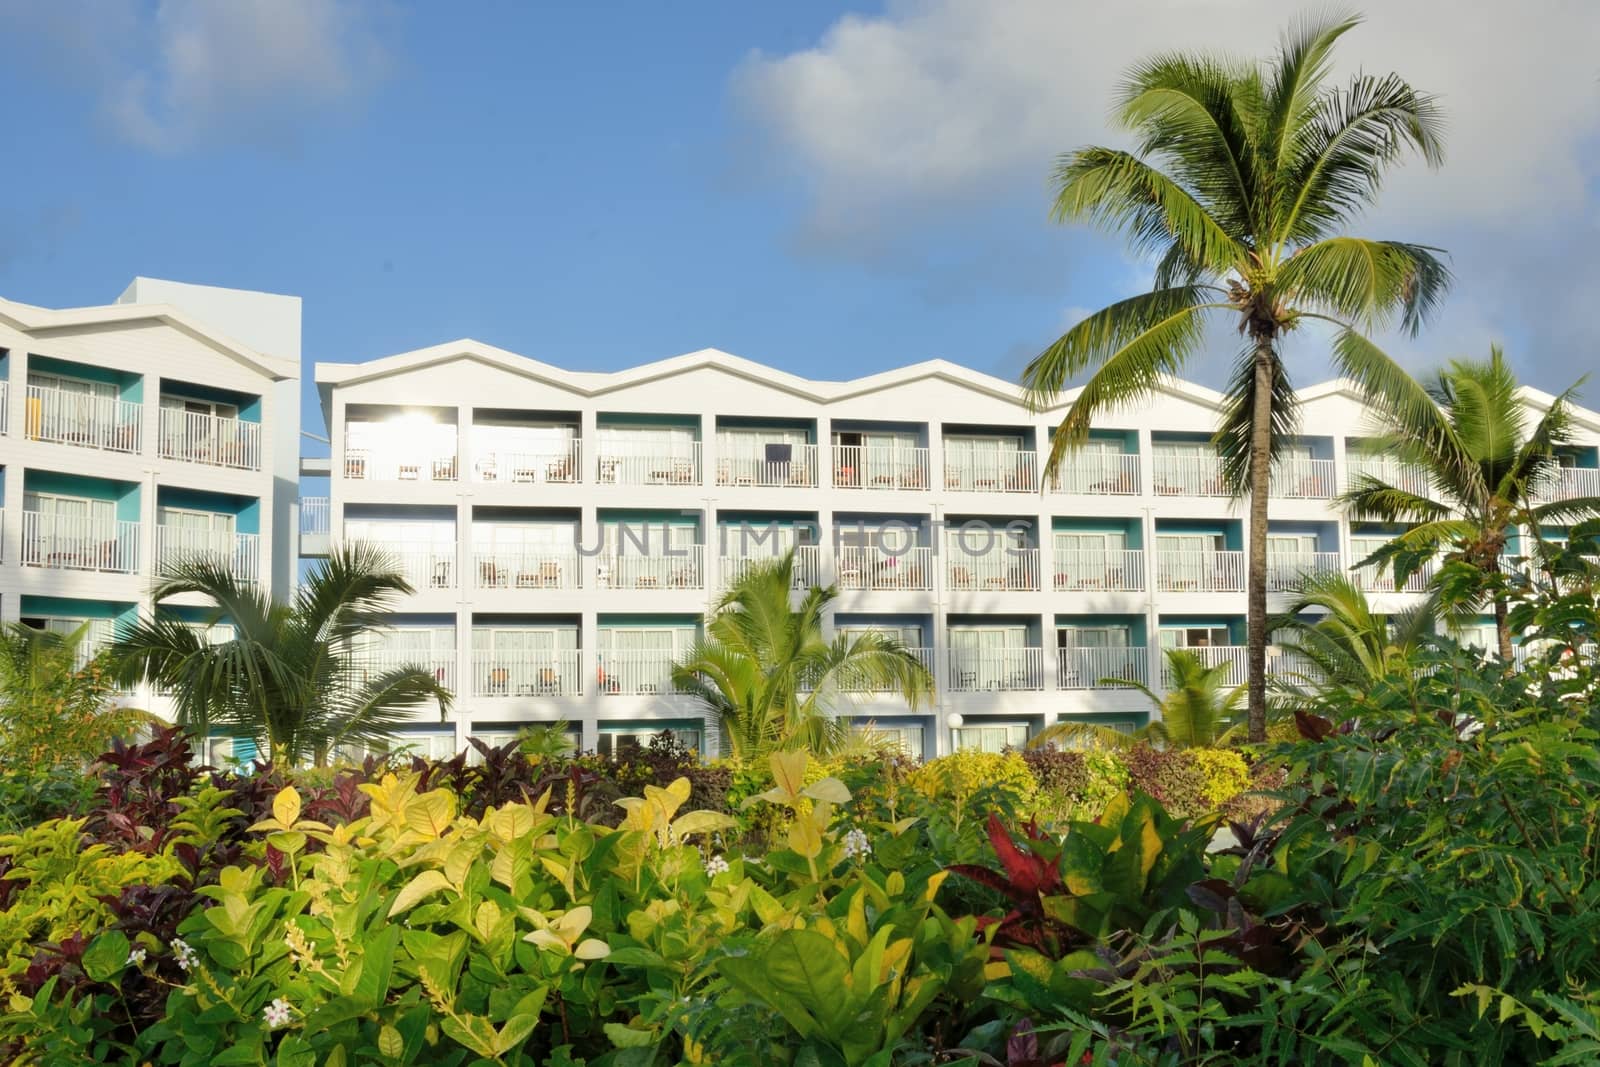 Caribbean hotel with greenery in foreground